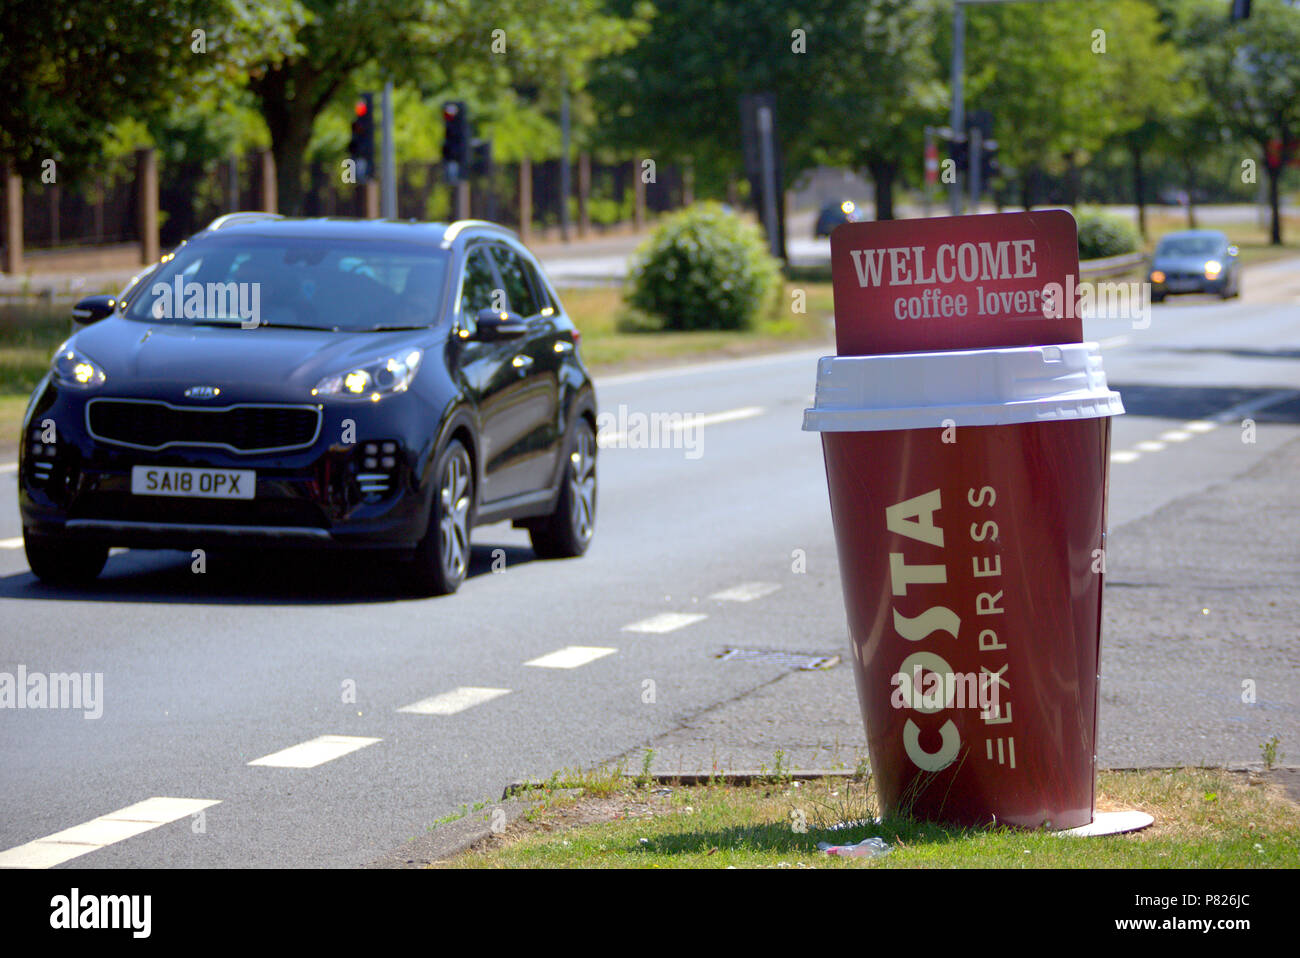 A82 A 82 costa coffee espresso giant coffee cup driving motorway road stop over falling asleep at the wheel Stock Photo